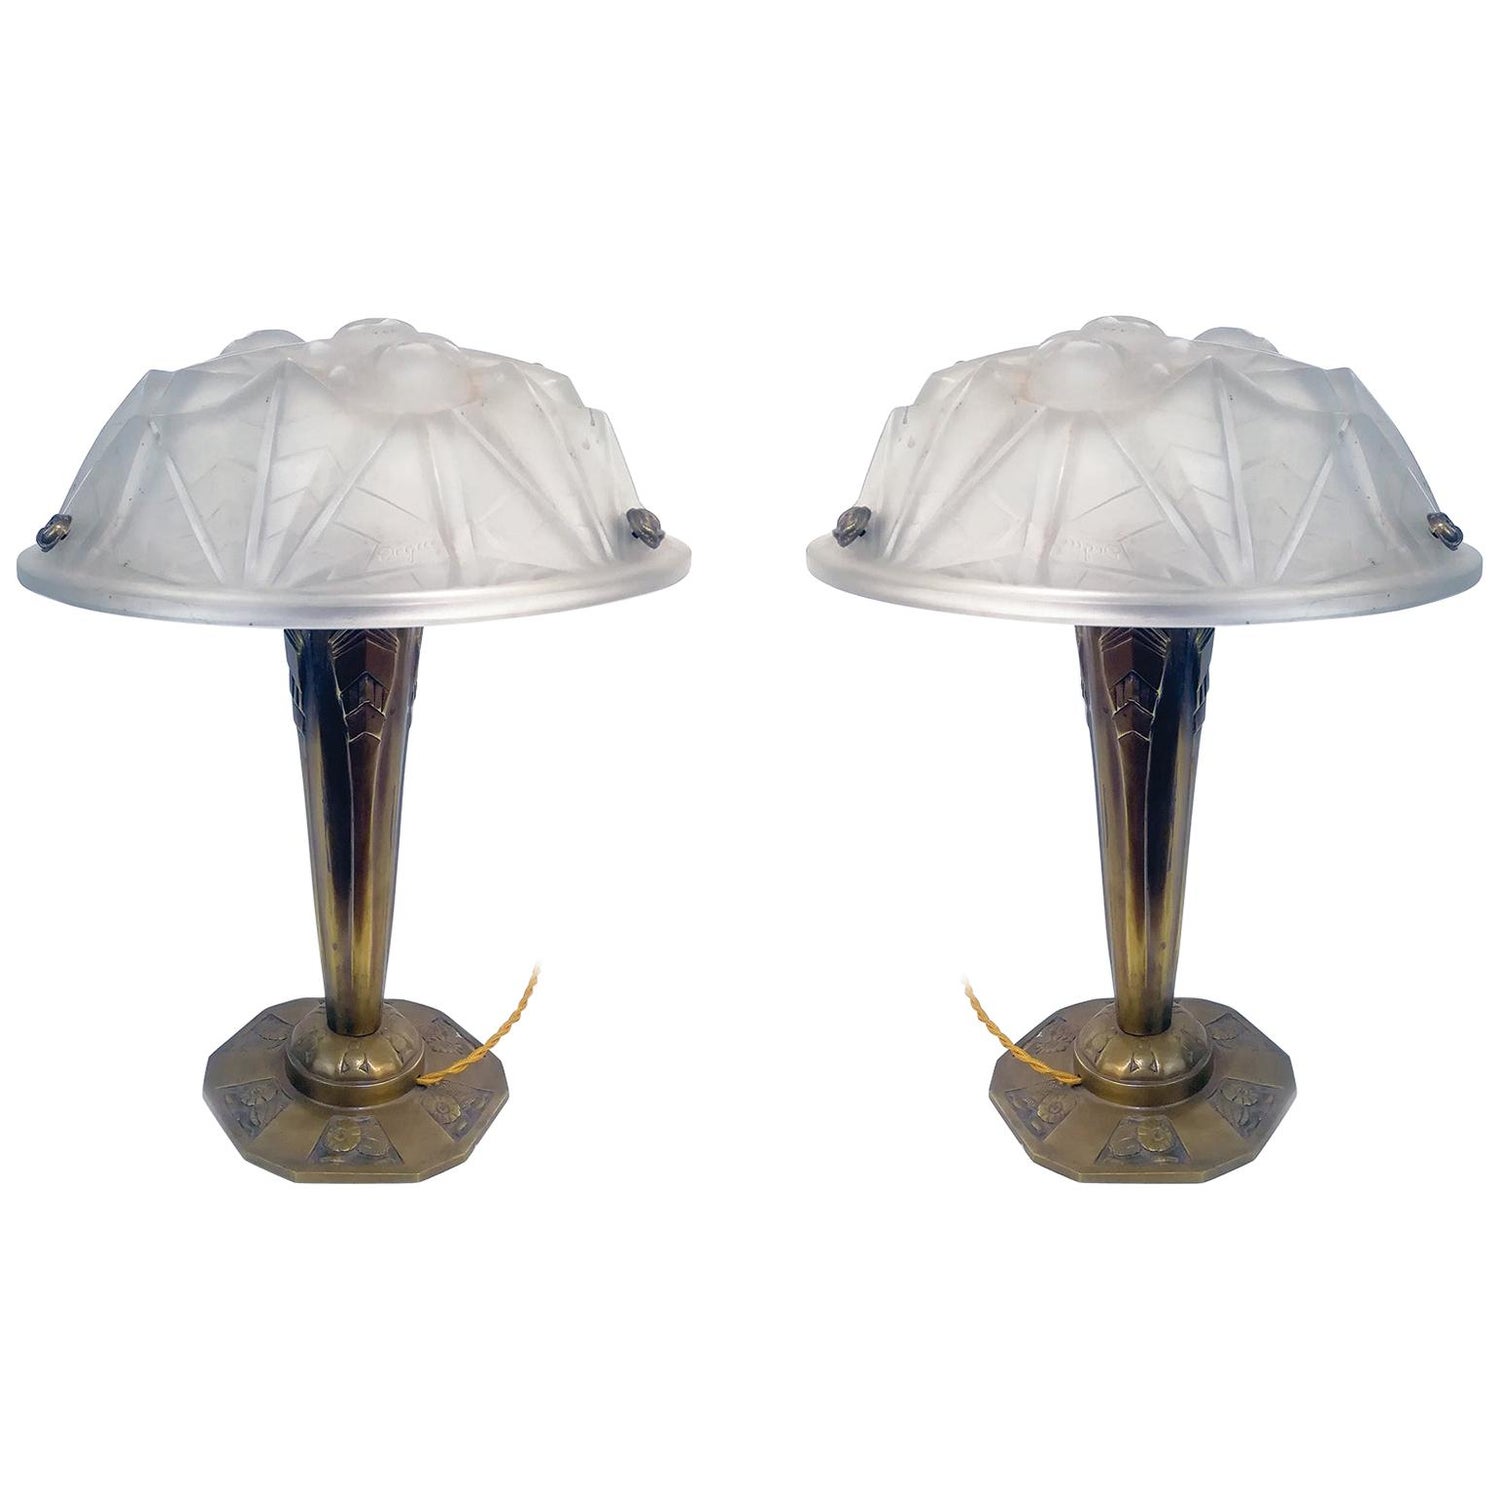 Pair of French Art Deco Table Lamp Signed “Degué” For Sale at 1stDibs | degue  lamp